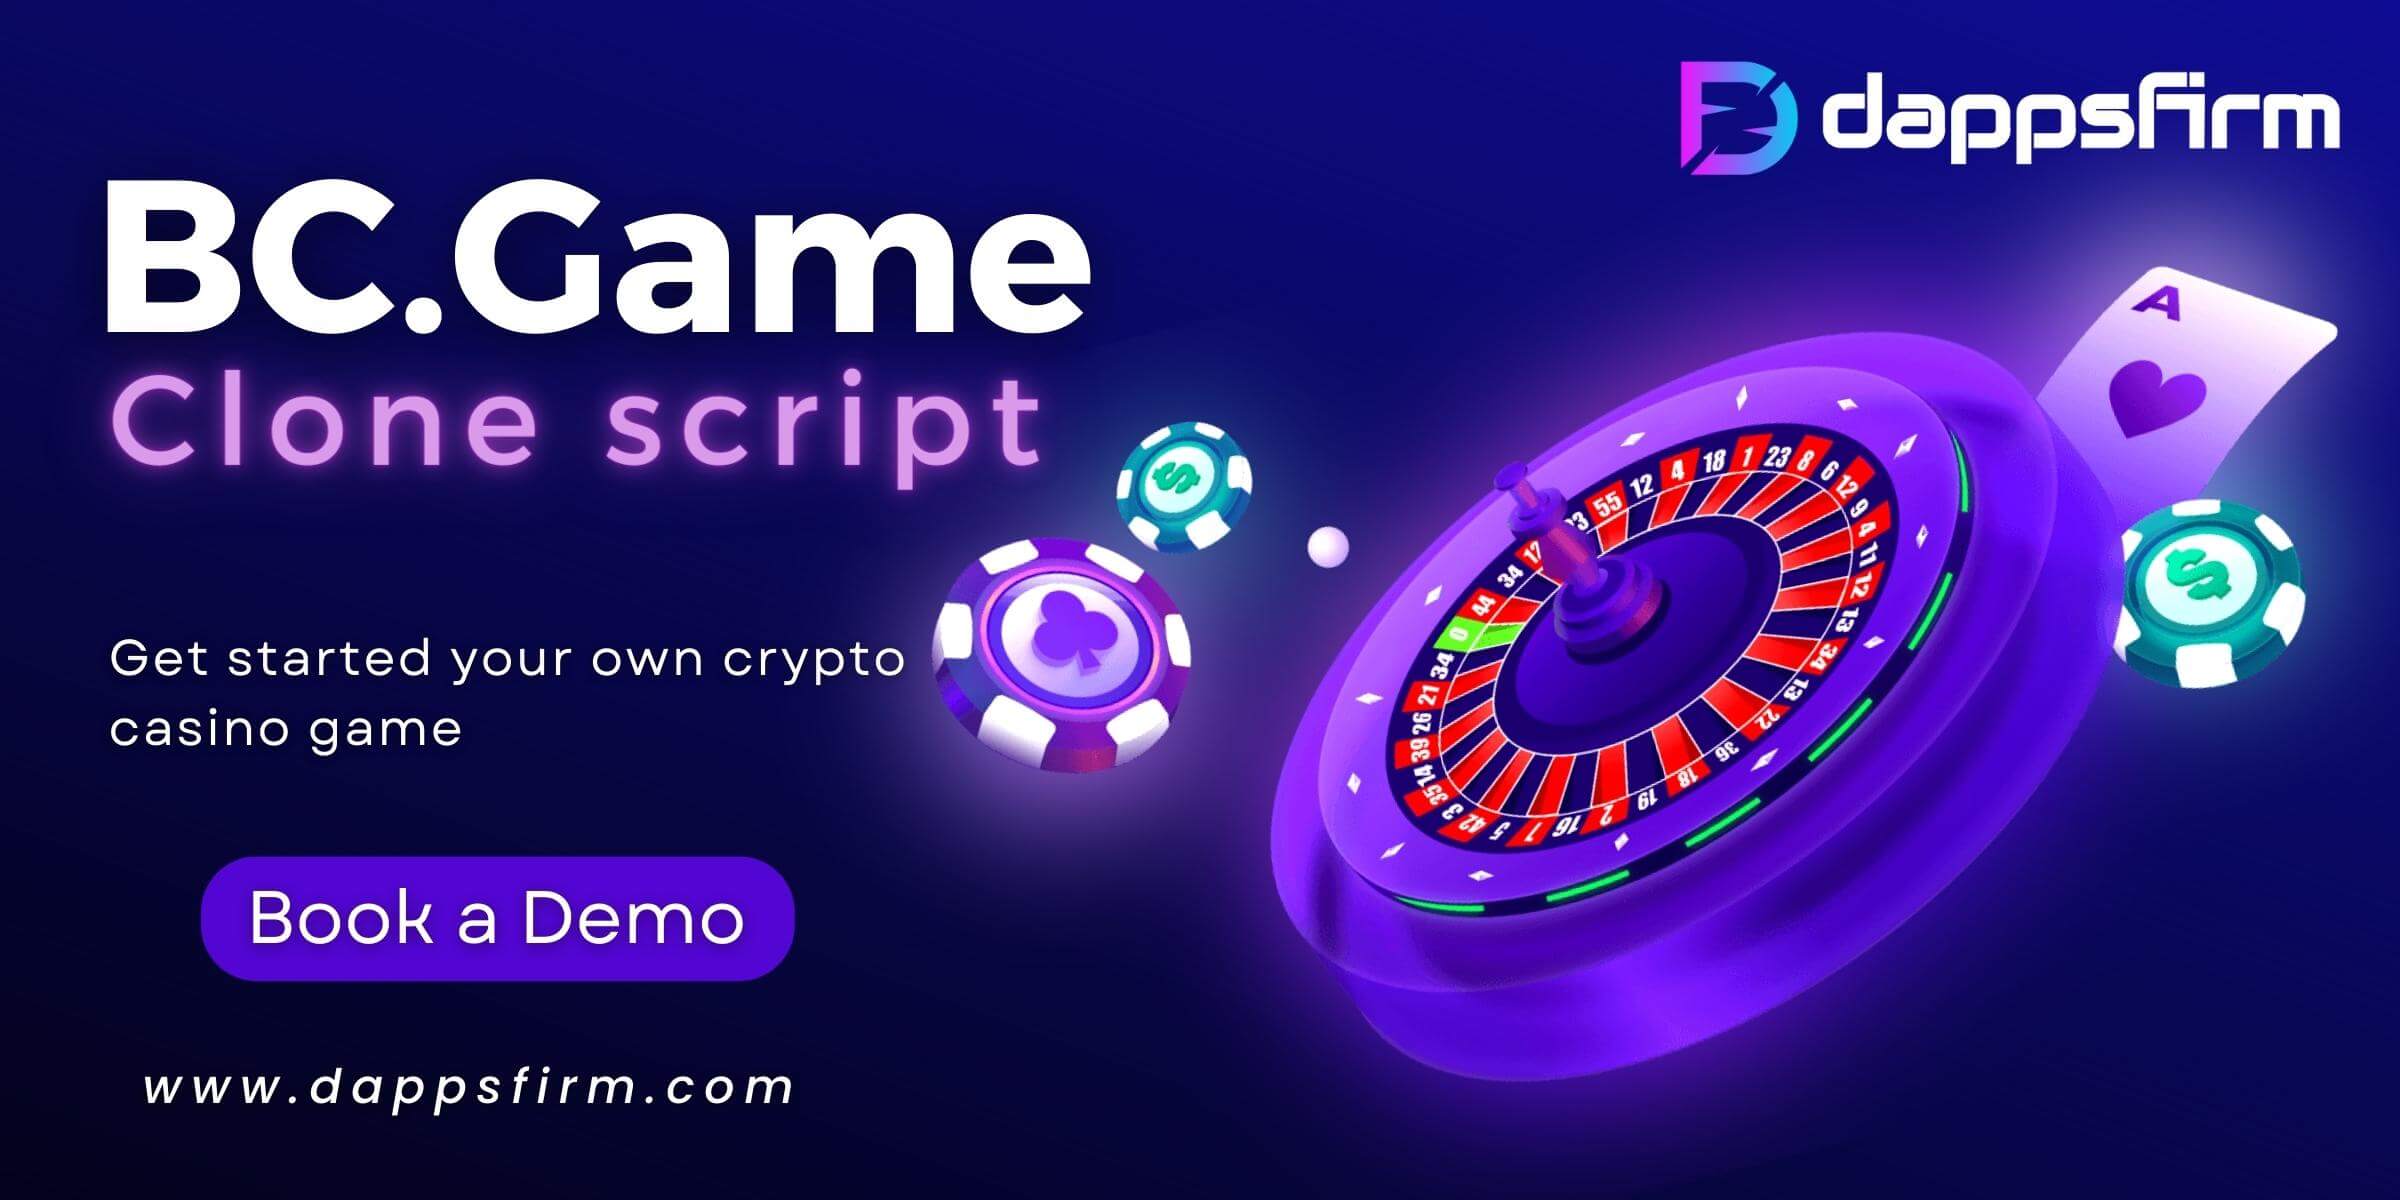 BC.Game Clone Script - To Launch Your Own Crypto Casino Game Today